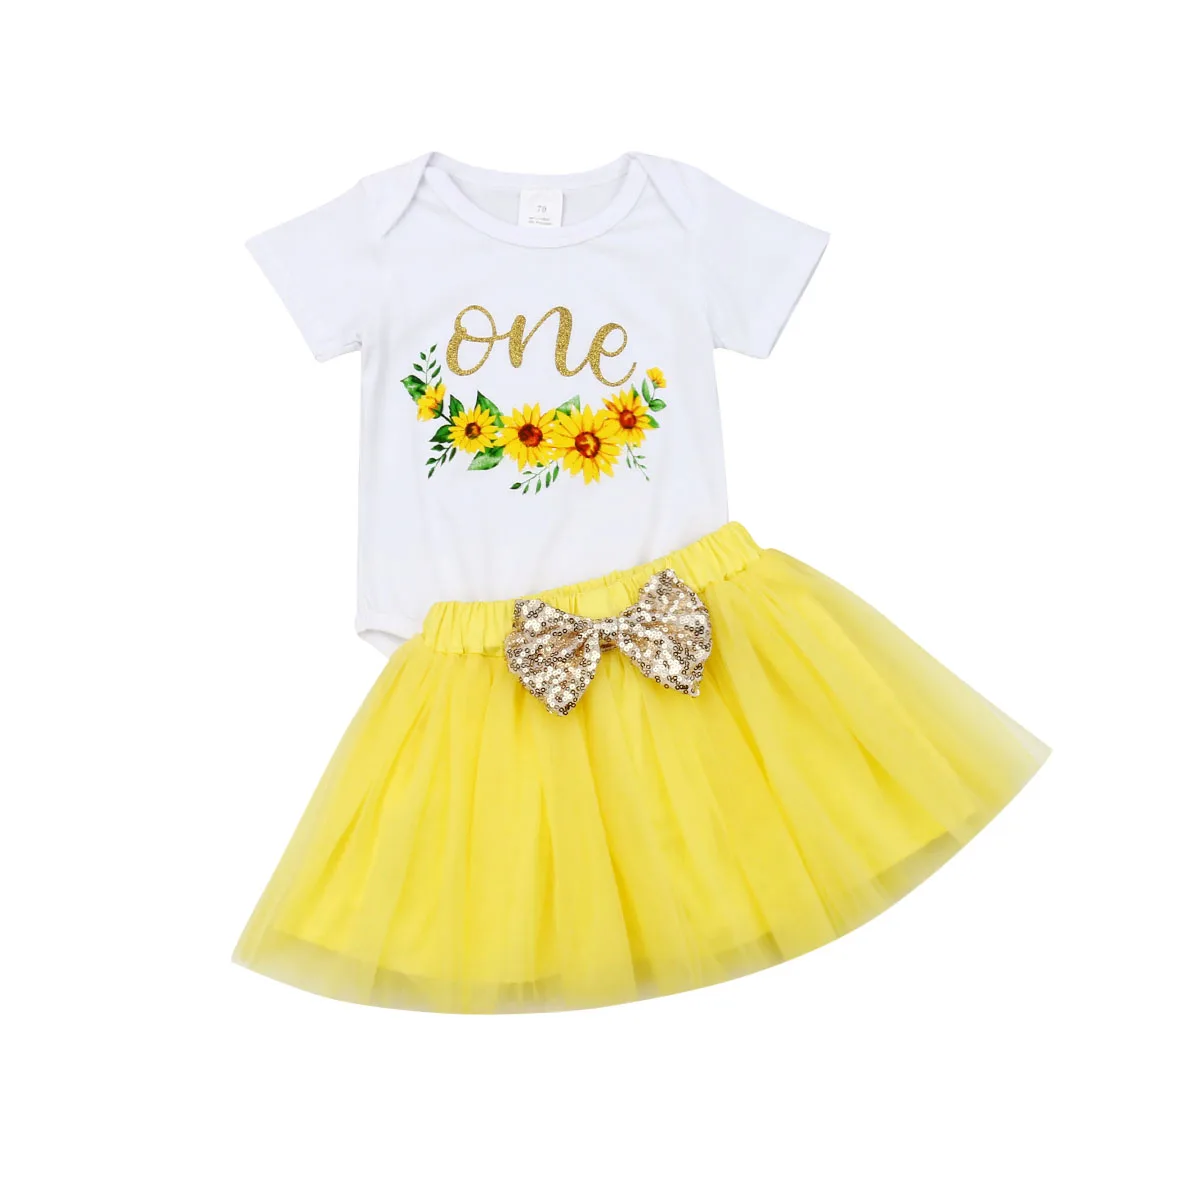 

2019 Summer Baby Clothes Newborn Baby Girls 1st Birthday Floral Print Bodysuit+Tutu Skirt 2pcs Outfits Gifts Size 0-24M